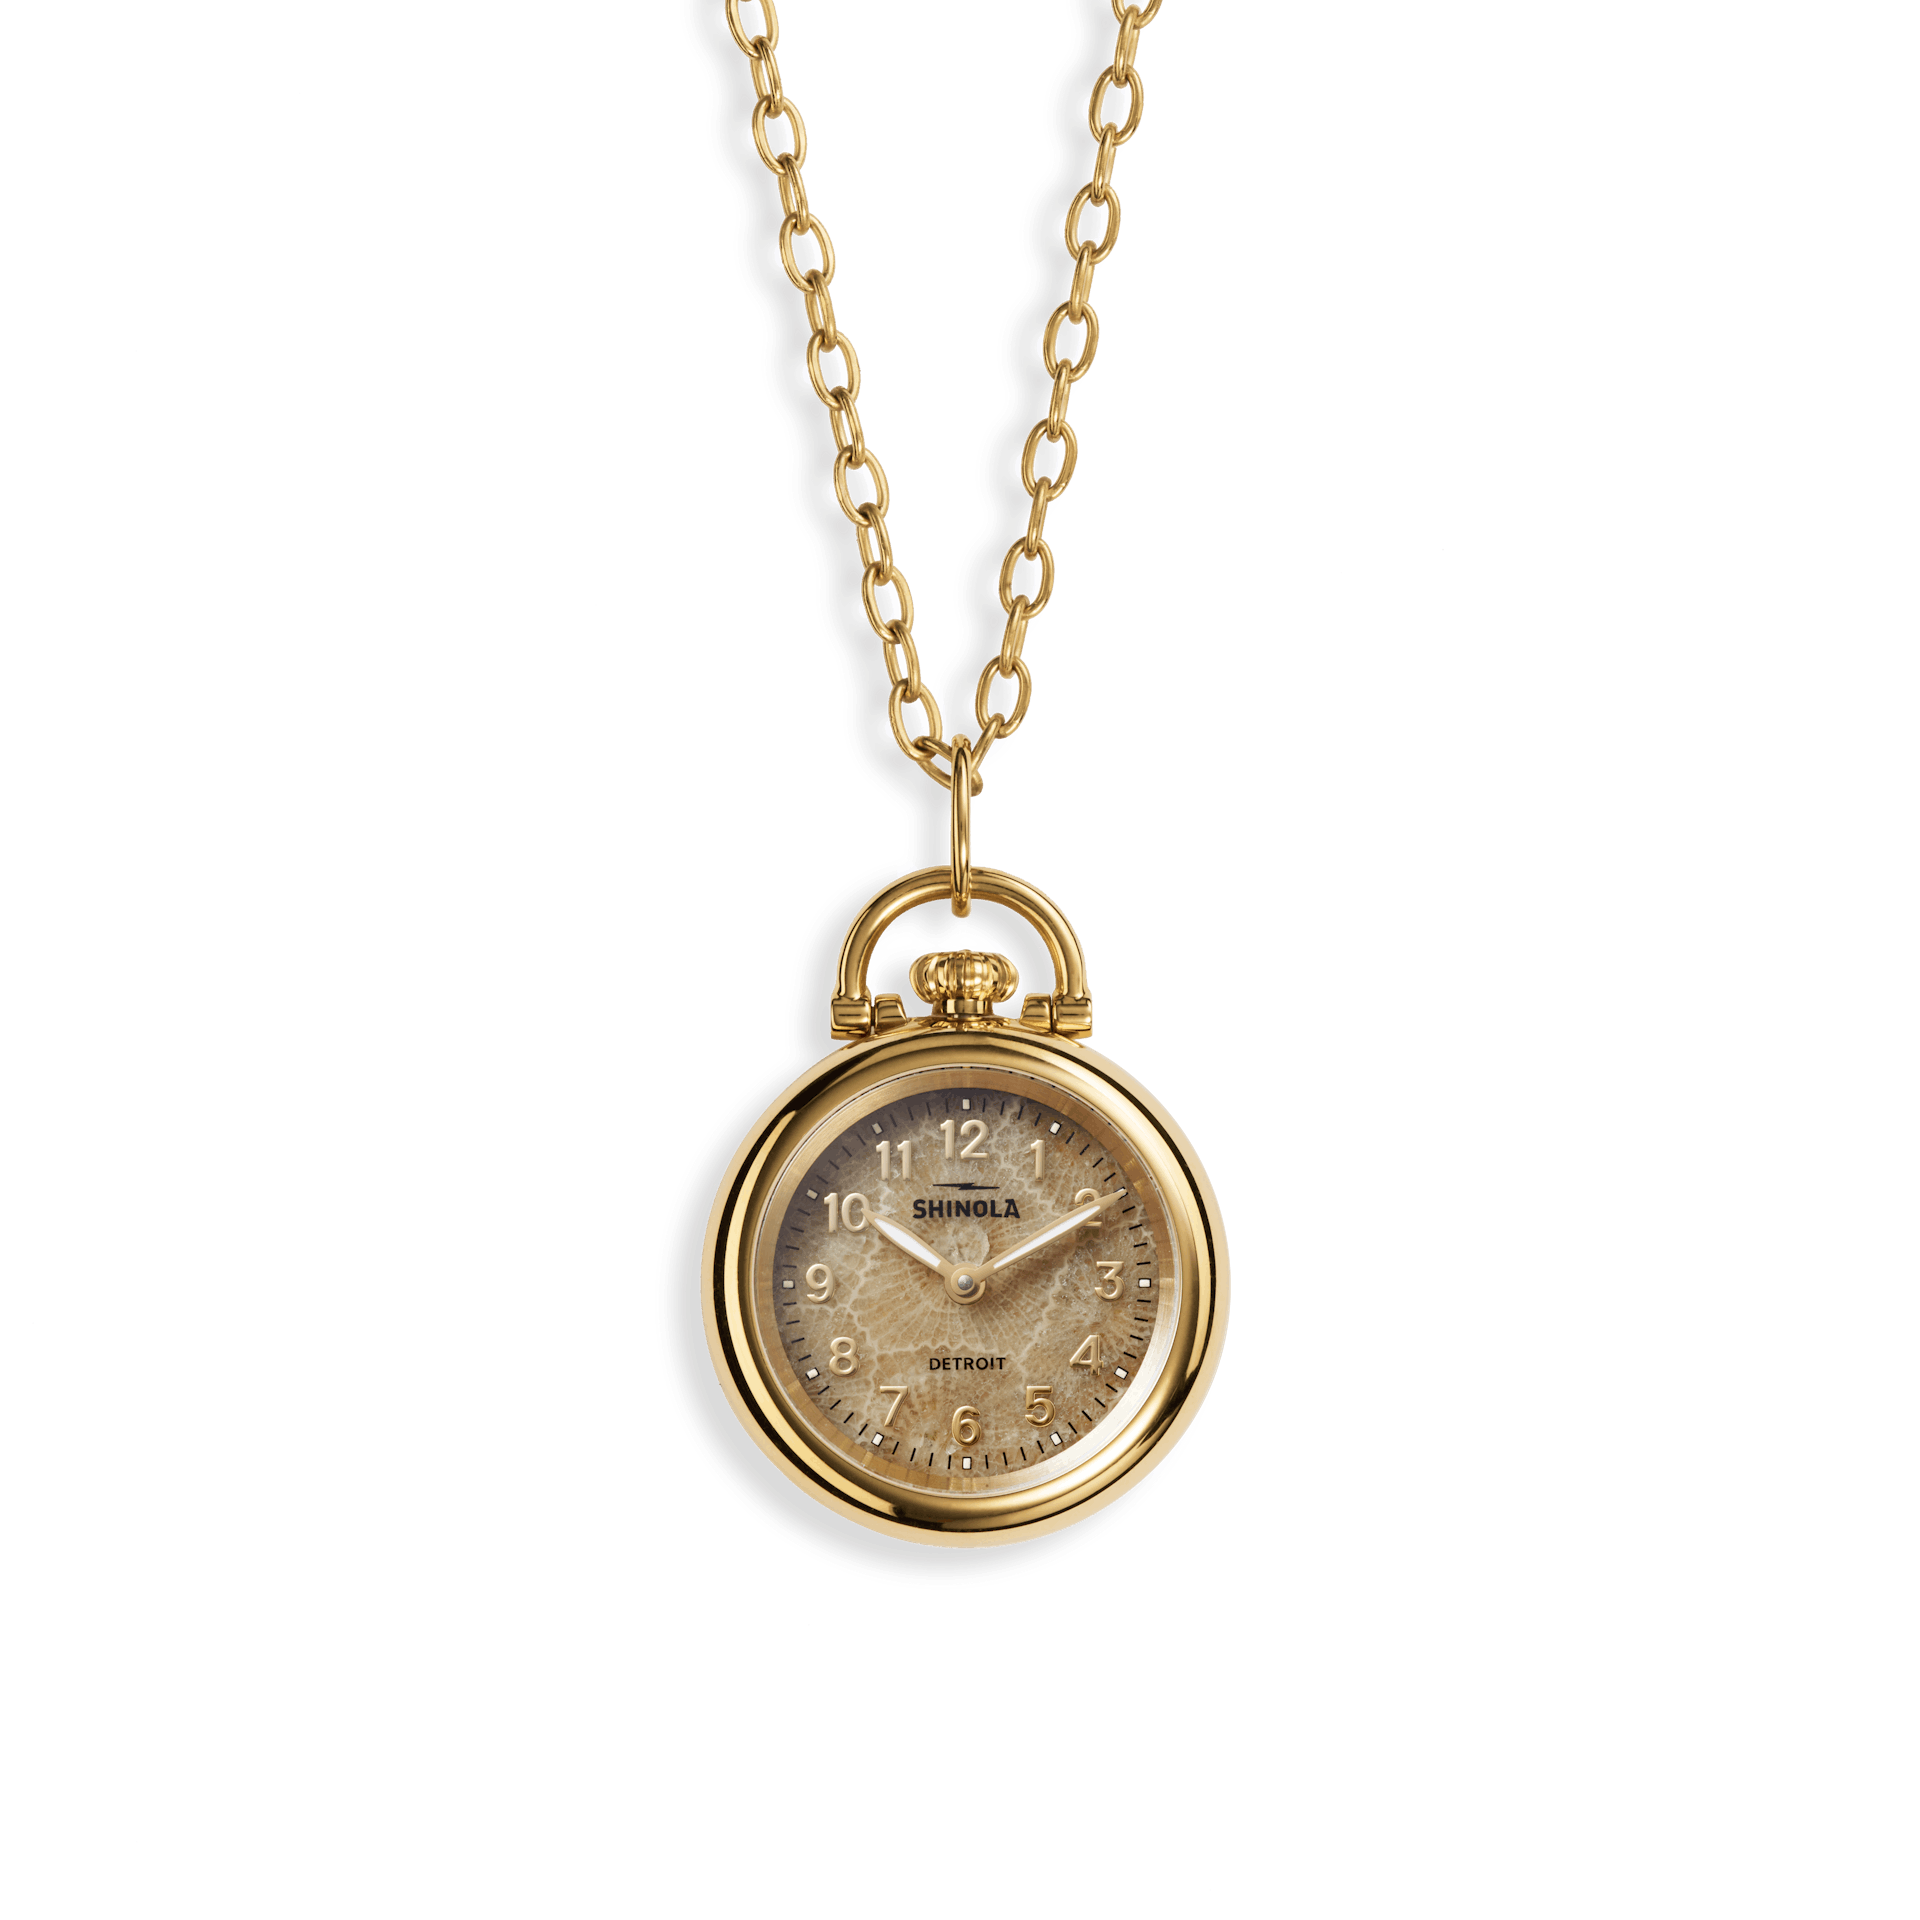 One of a kind Vintage Pocket Watch Assemblage Necklace – Upcycled Works